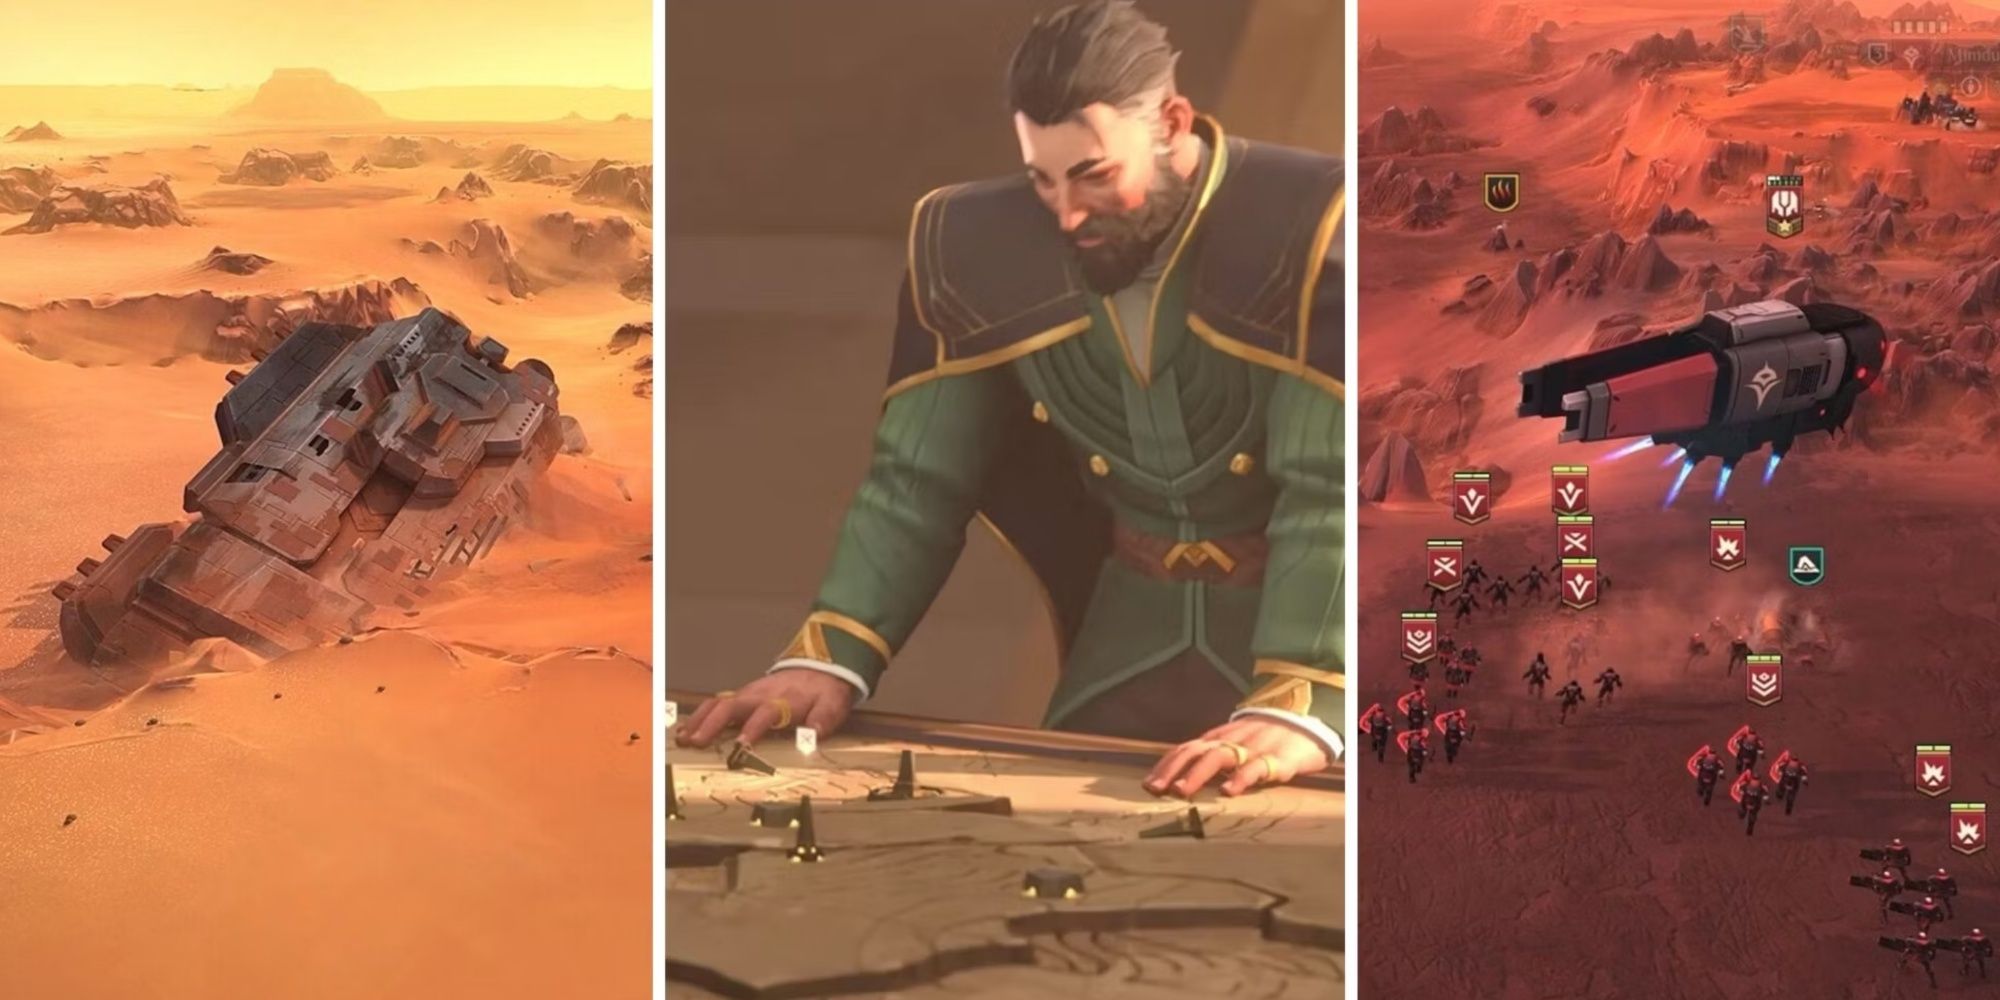 Split Image of Arrakis, a character looking over map, and a battle in Dune Spice Wars.